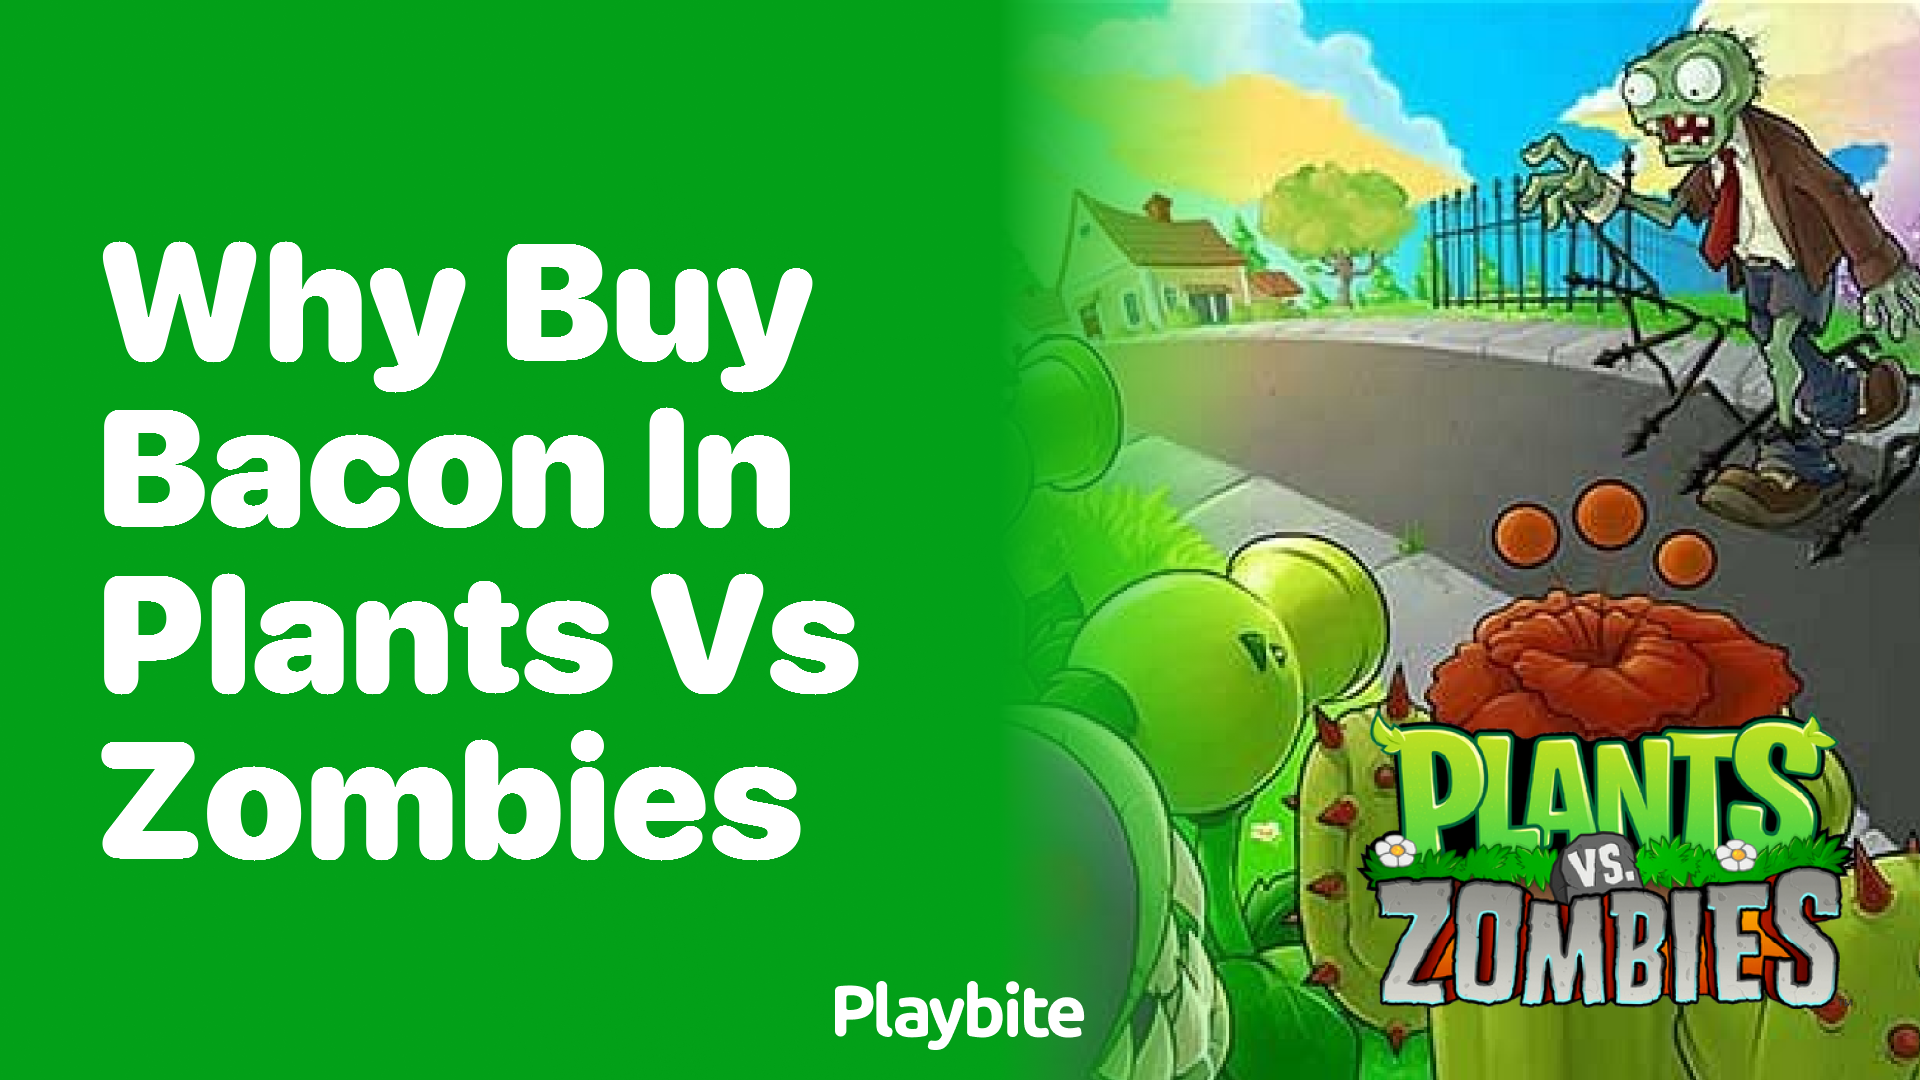 Why buy bacon in Plants vs Zombies?